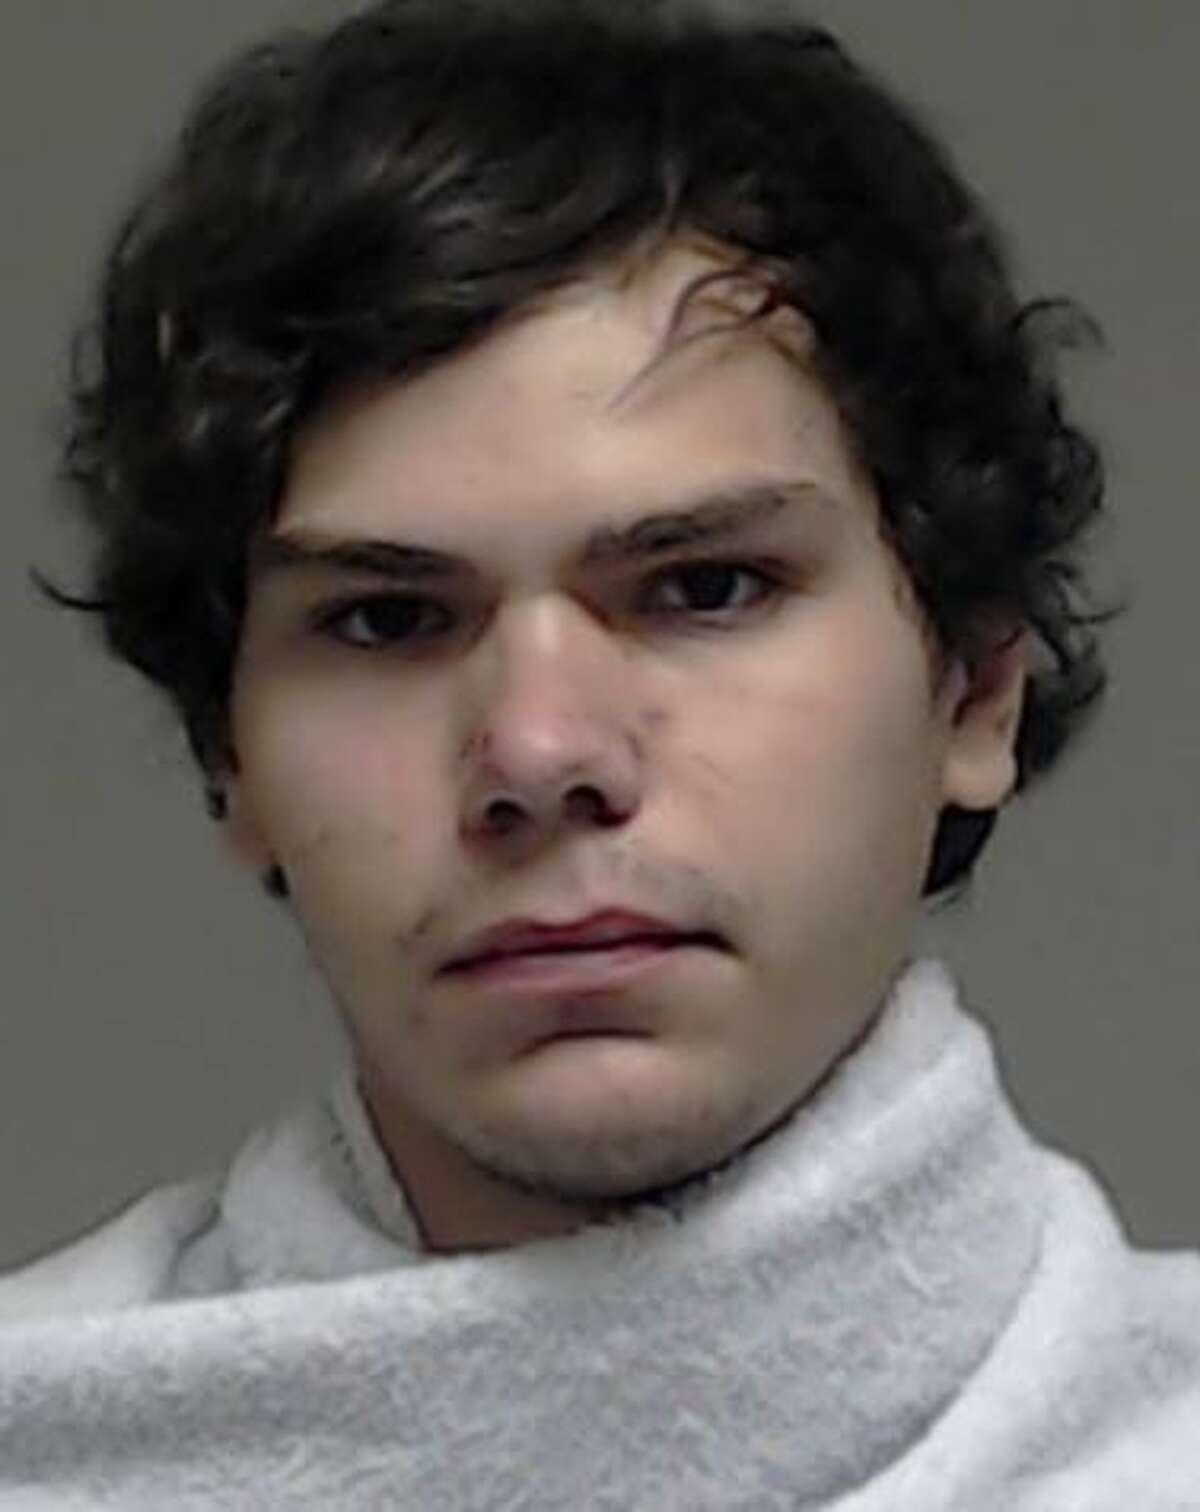 Michael John Ennis was arrested and booked Tuesday into the Collin County Jail on a state jail felony charge of animal cruelty to a non-livestock animal via torture.